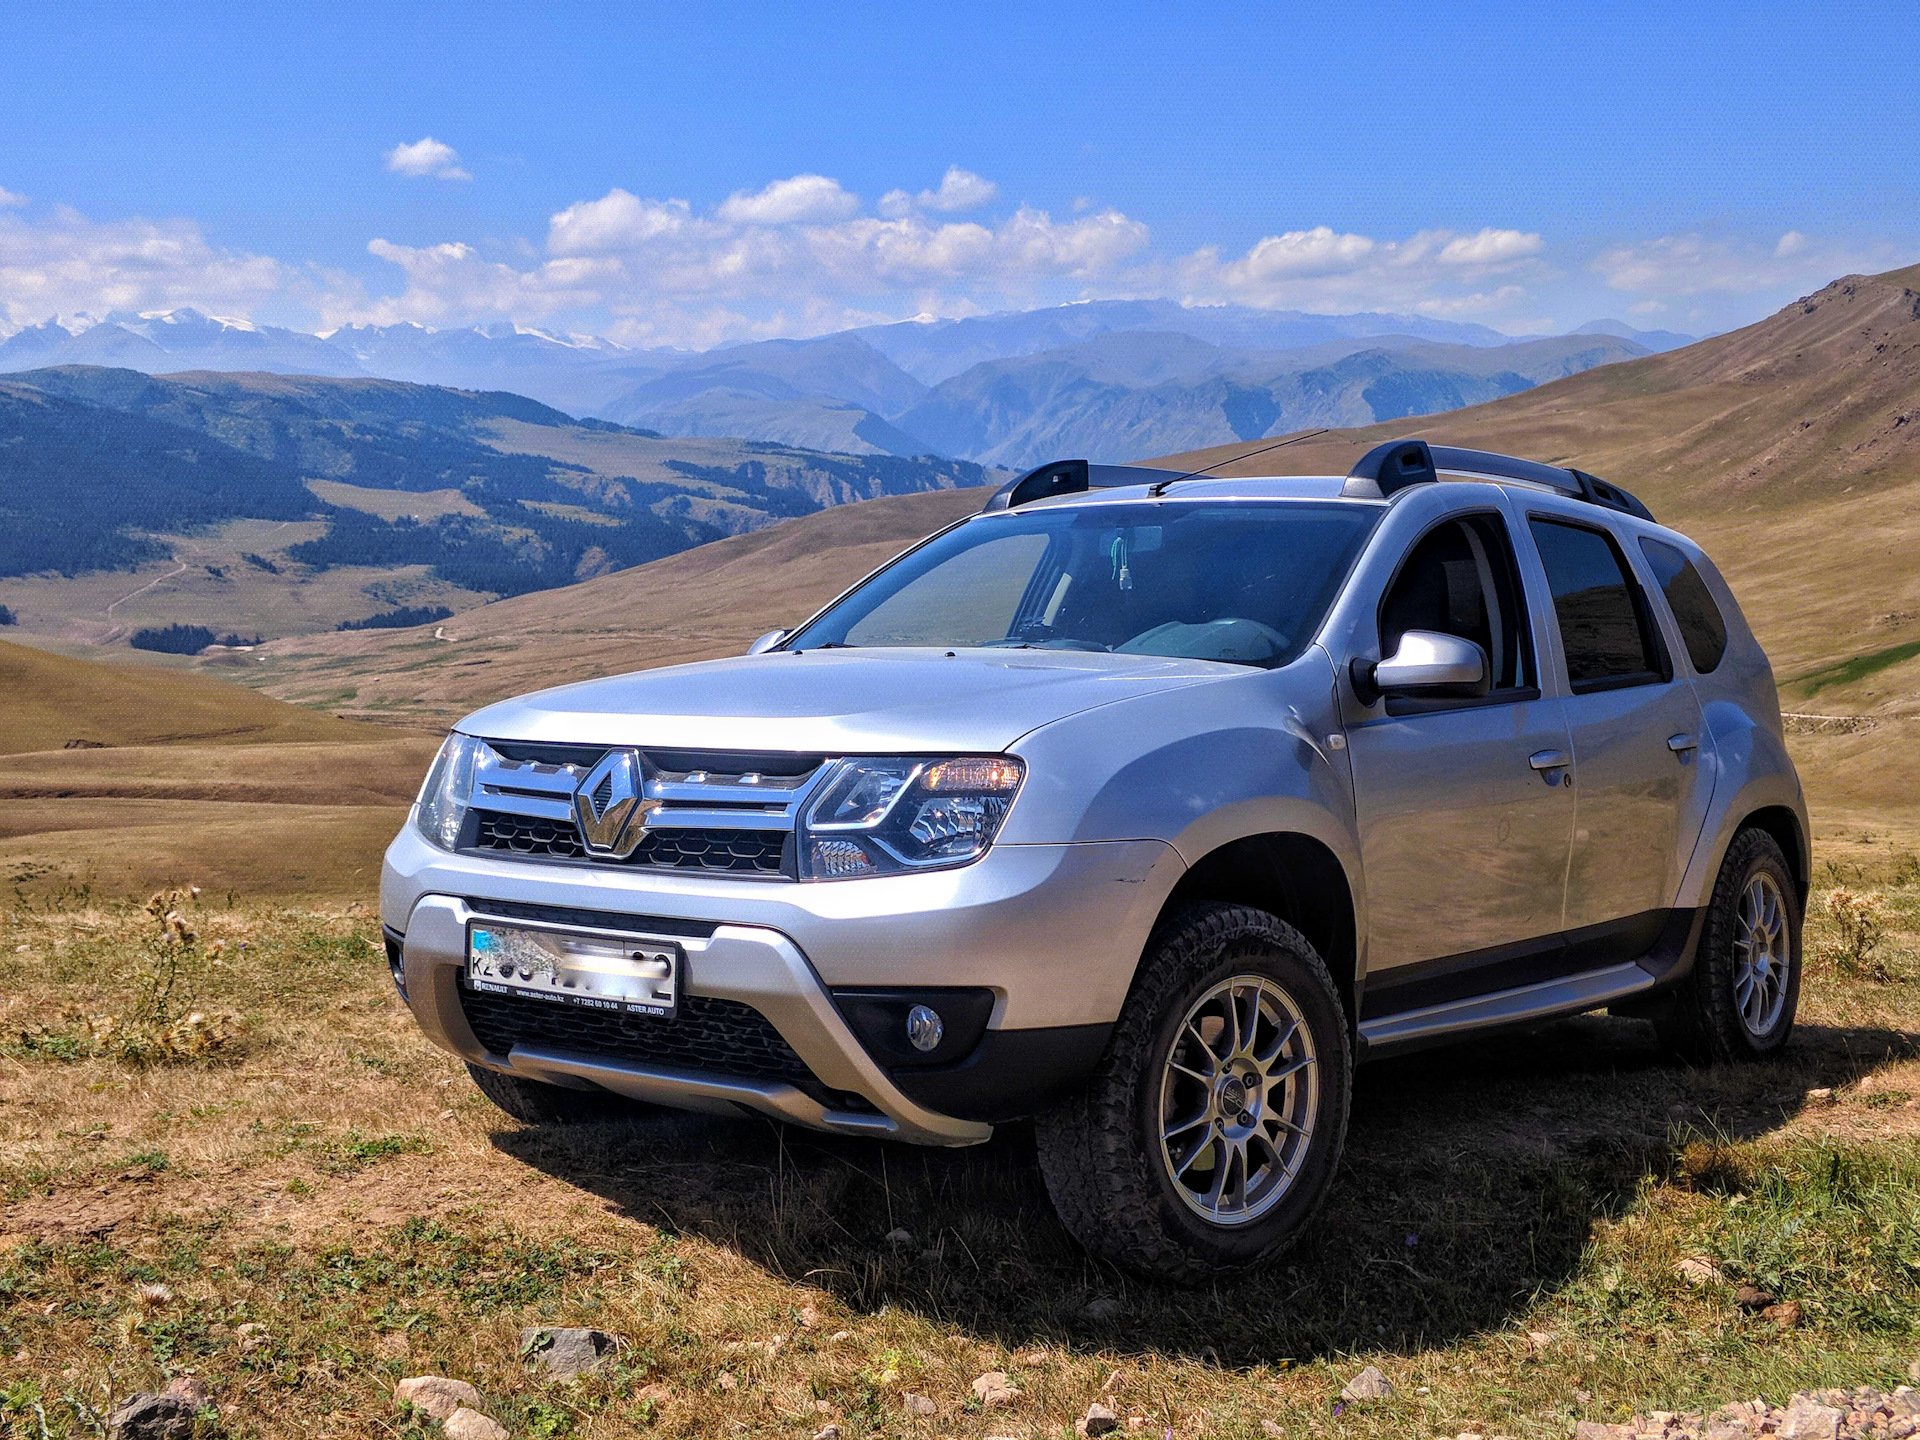 Дастер 4wd 2.0. Renault Duster 2. Renault Duster 1. Renault Duster 2016. Renault Duster 4.